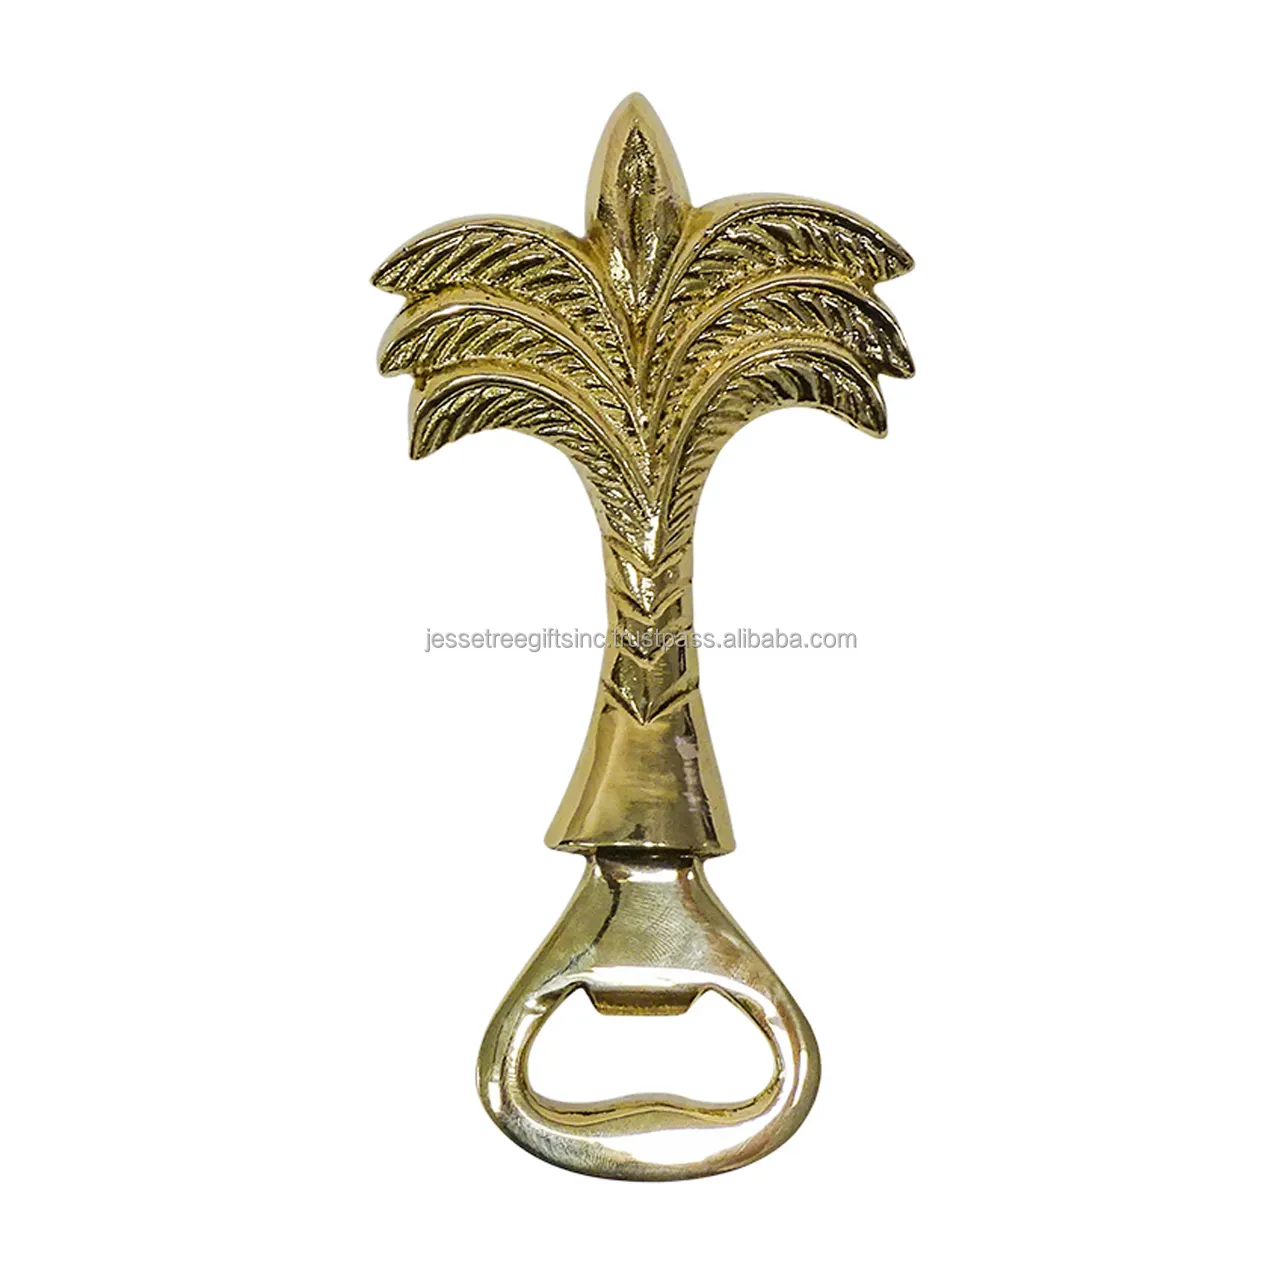 Metal Bottle Opener With Shiny Polish Finishing Tree Shape Handle Embossed Design Excellent Quality For Opener Wholesale Price